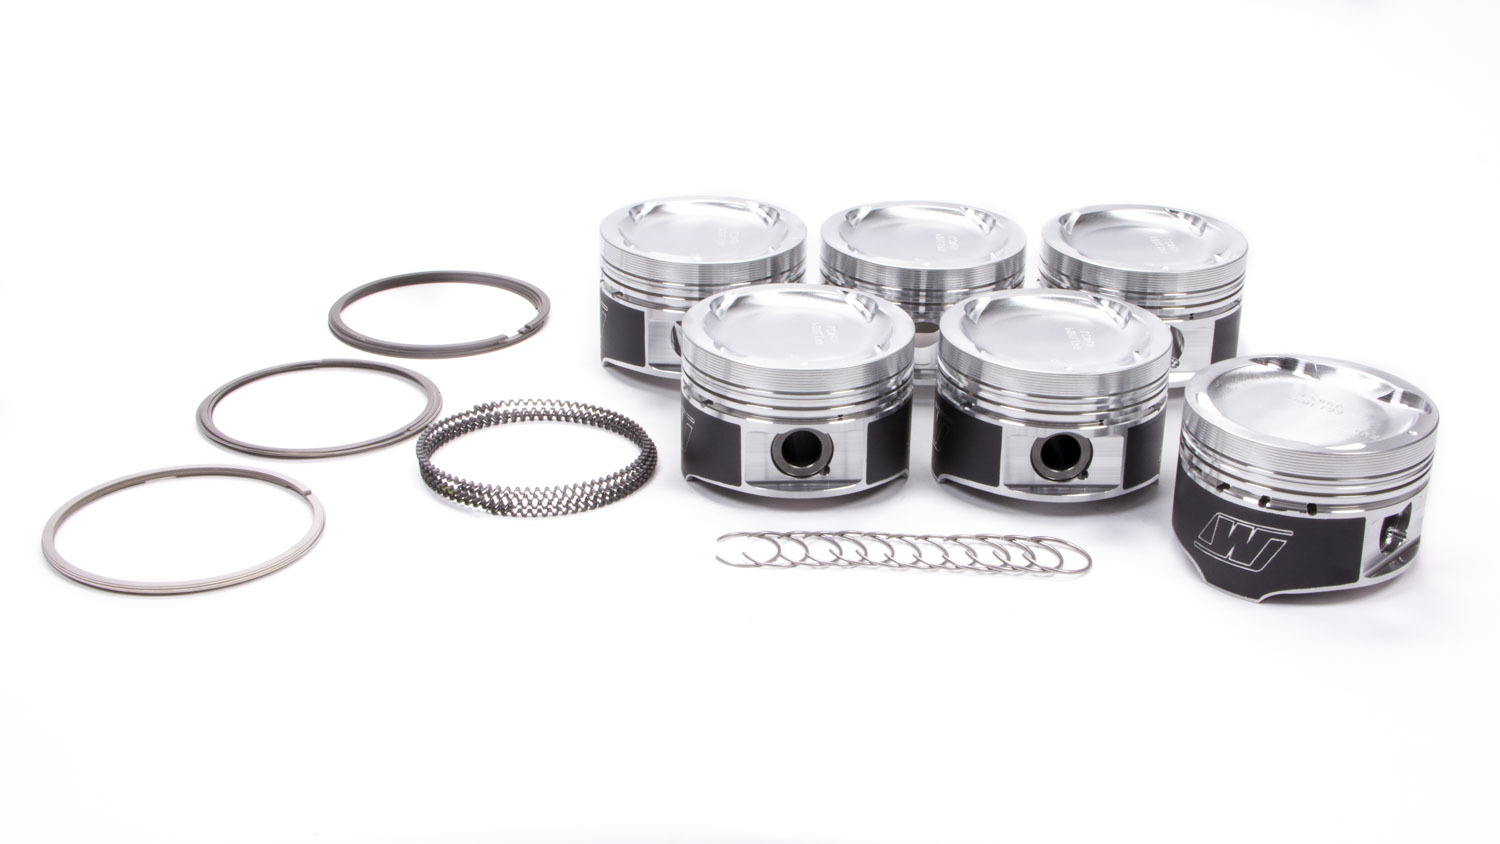 Wiseco Pistons K613M835 Piston and Ring, Sports Compact, Forged, 83.50 mm Bore, 1.0 x 1.2 x 2.8 mm Ring Groove, Minus 16.00 cc, Toyota In-Line-6, Kit